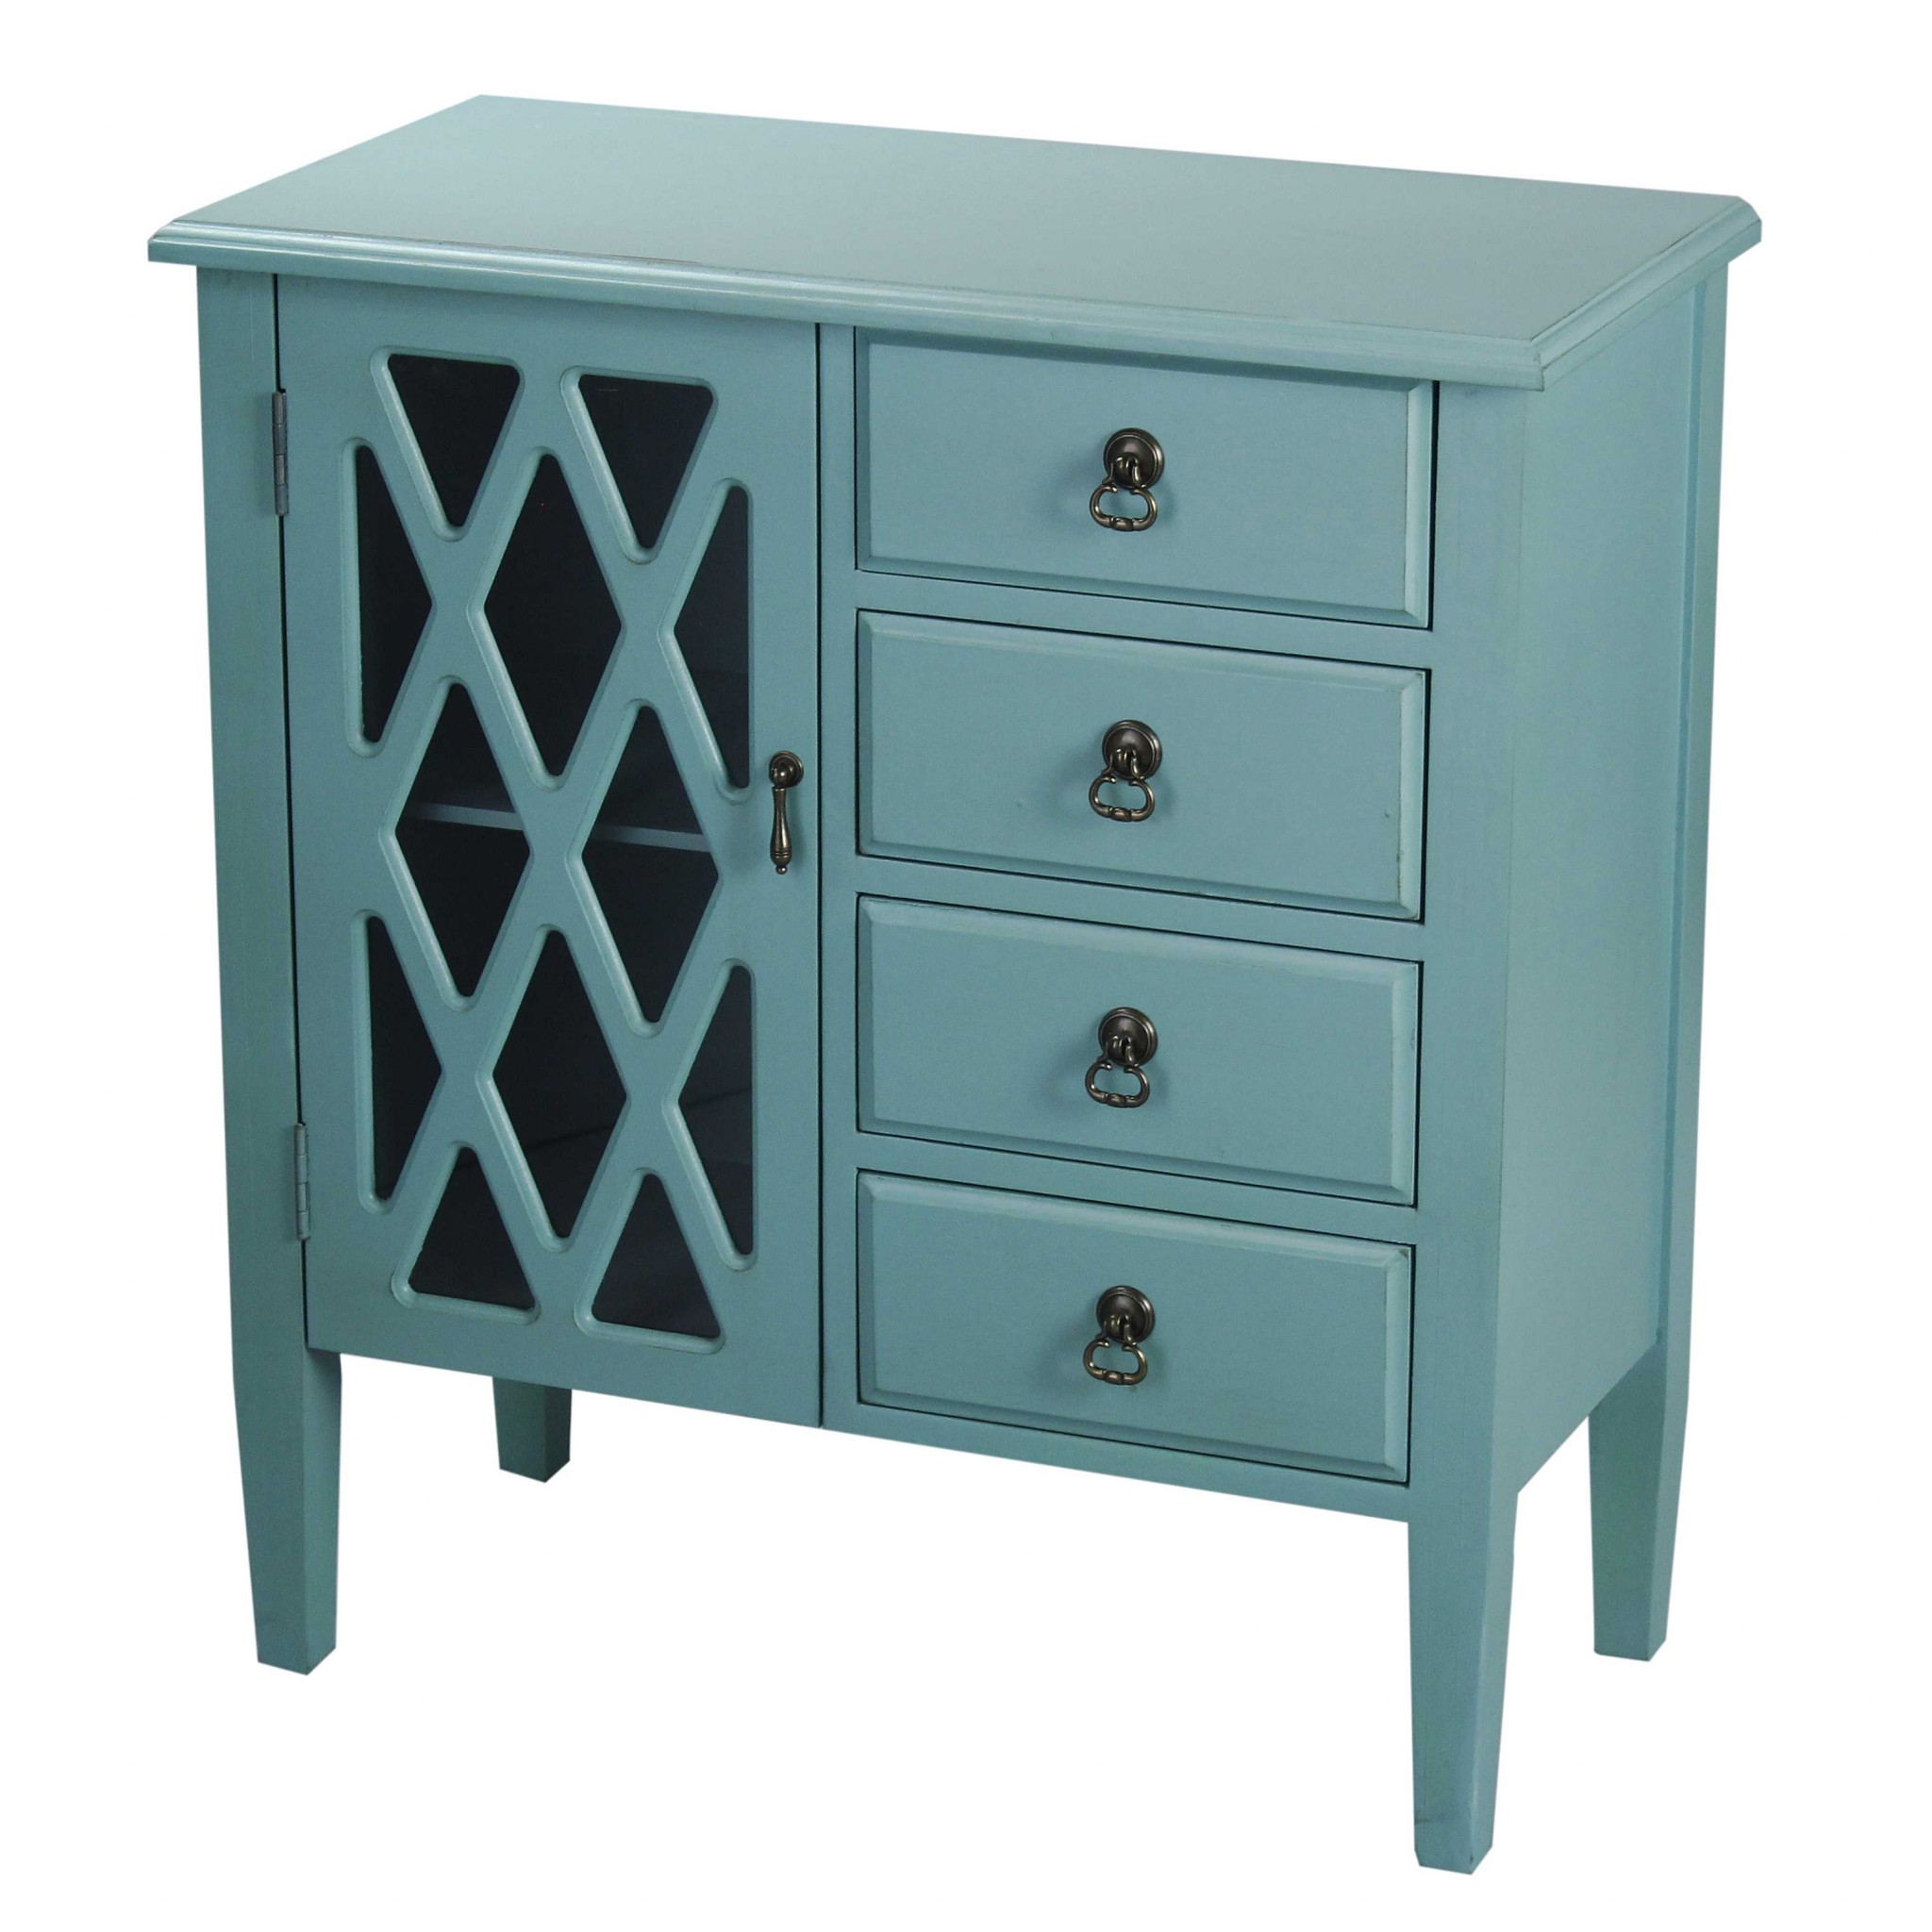 29.5" X 14.25" X 32" Turquoise MDF Wood Clear Glass Classic Sideboard with a Door and Drawers